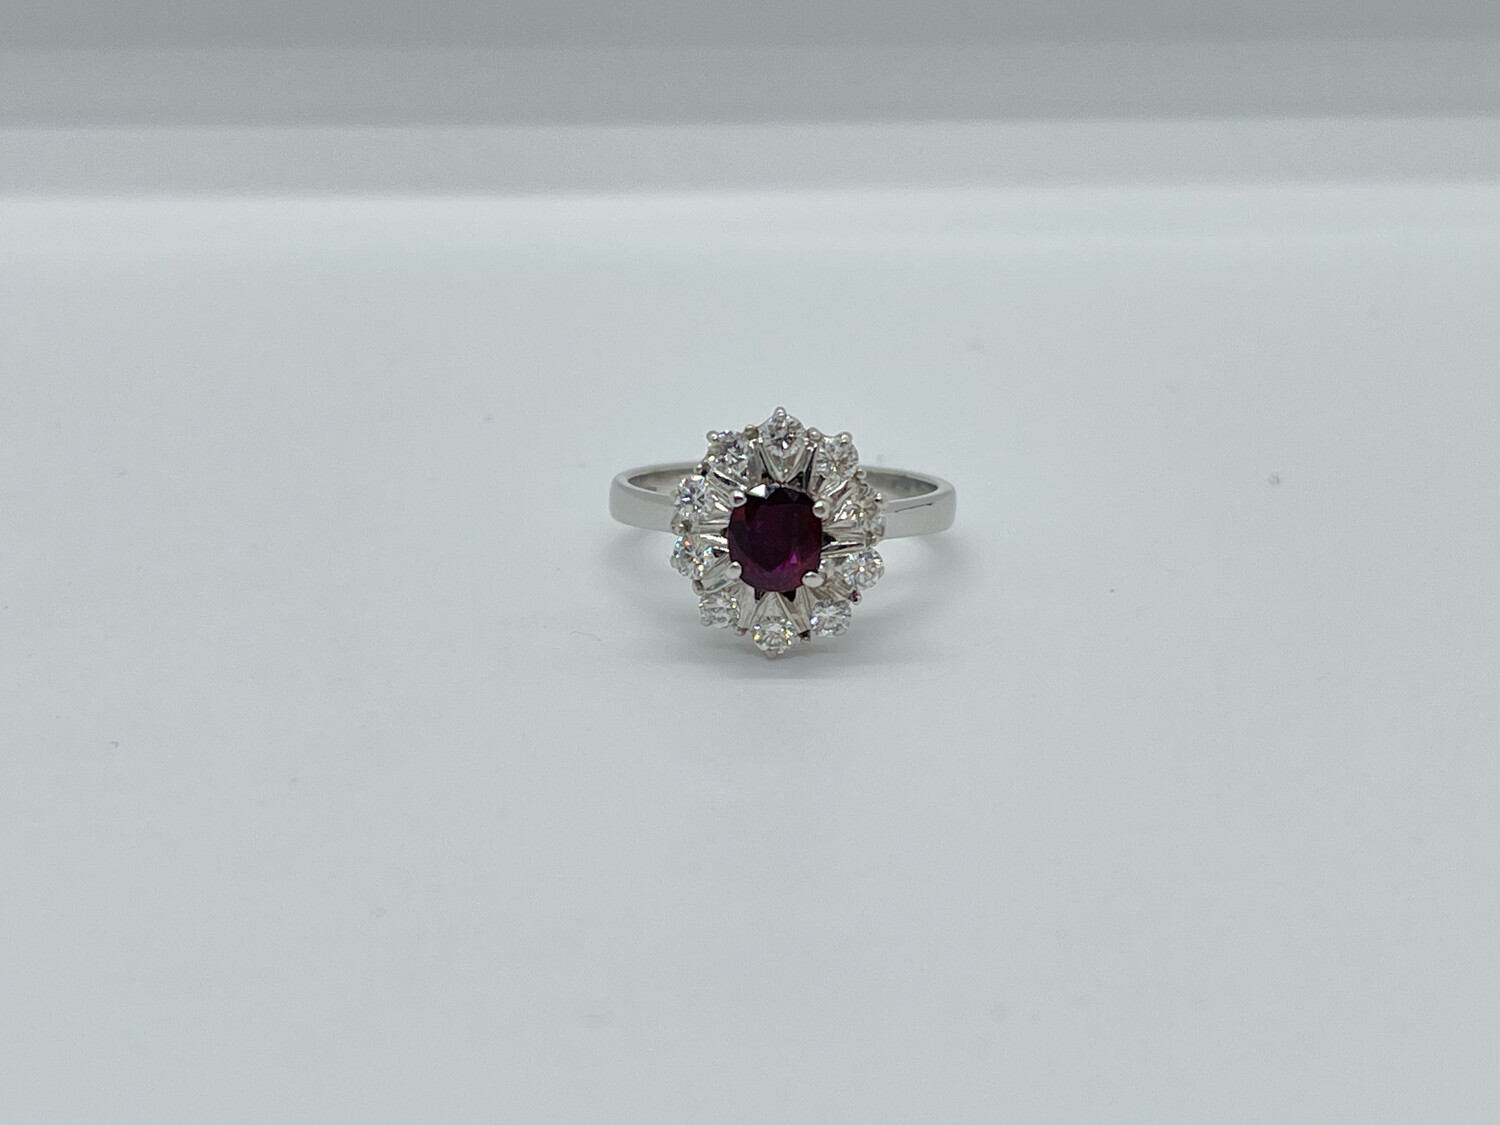 18ct White Gold Ruby And Diamond Cluster Ring